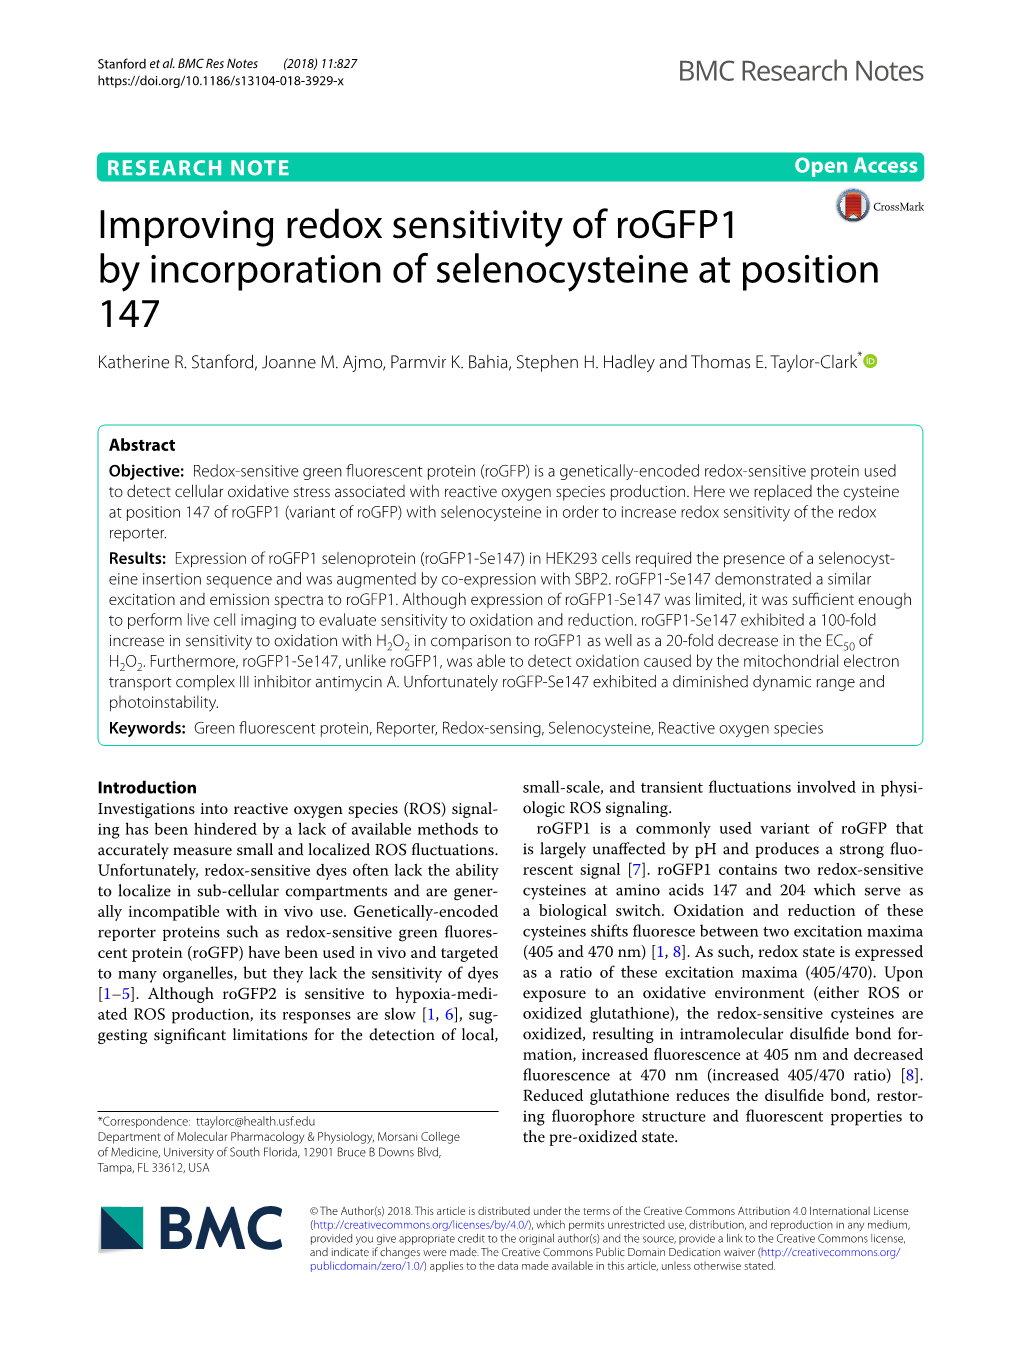 Improving Redox Sensitivity of Rogfp1 by Incorporation of Selenocysteine at Position 147 Katherine R